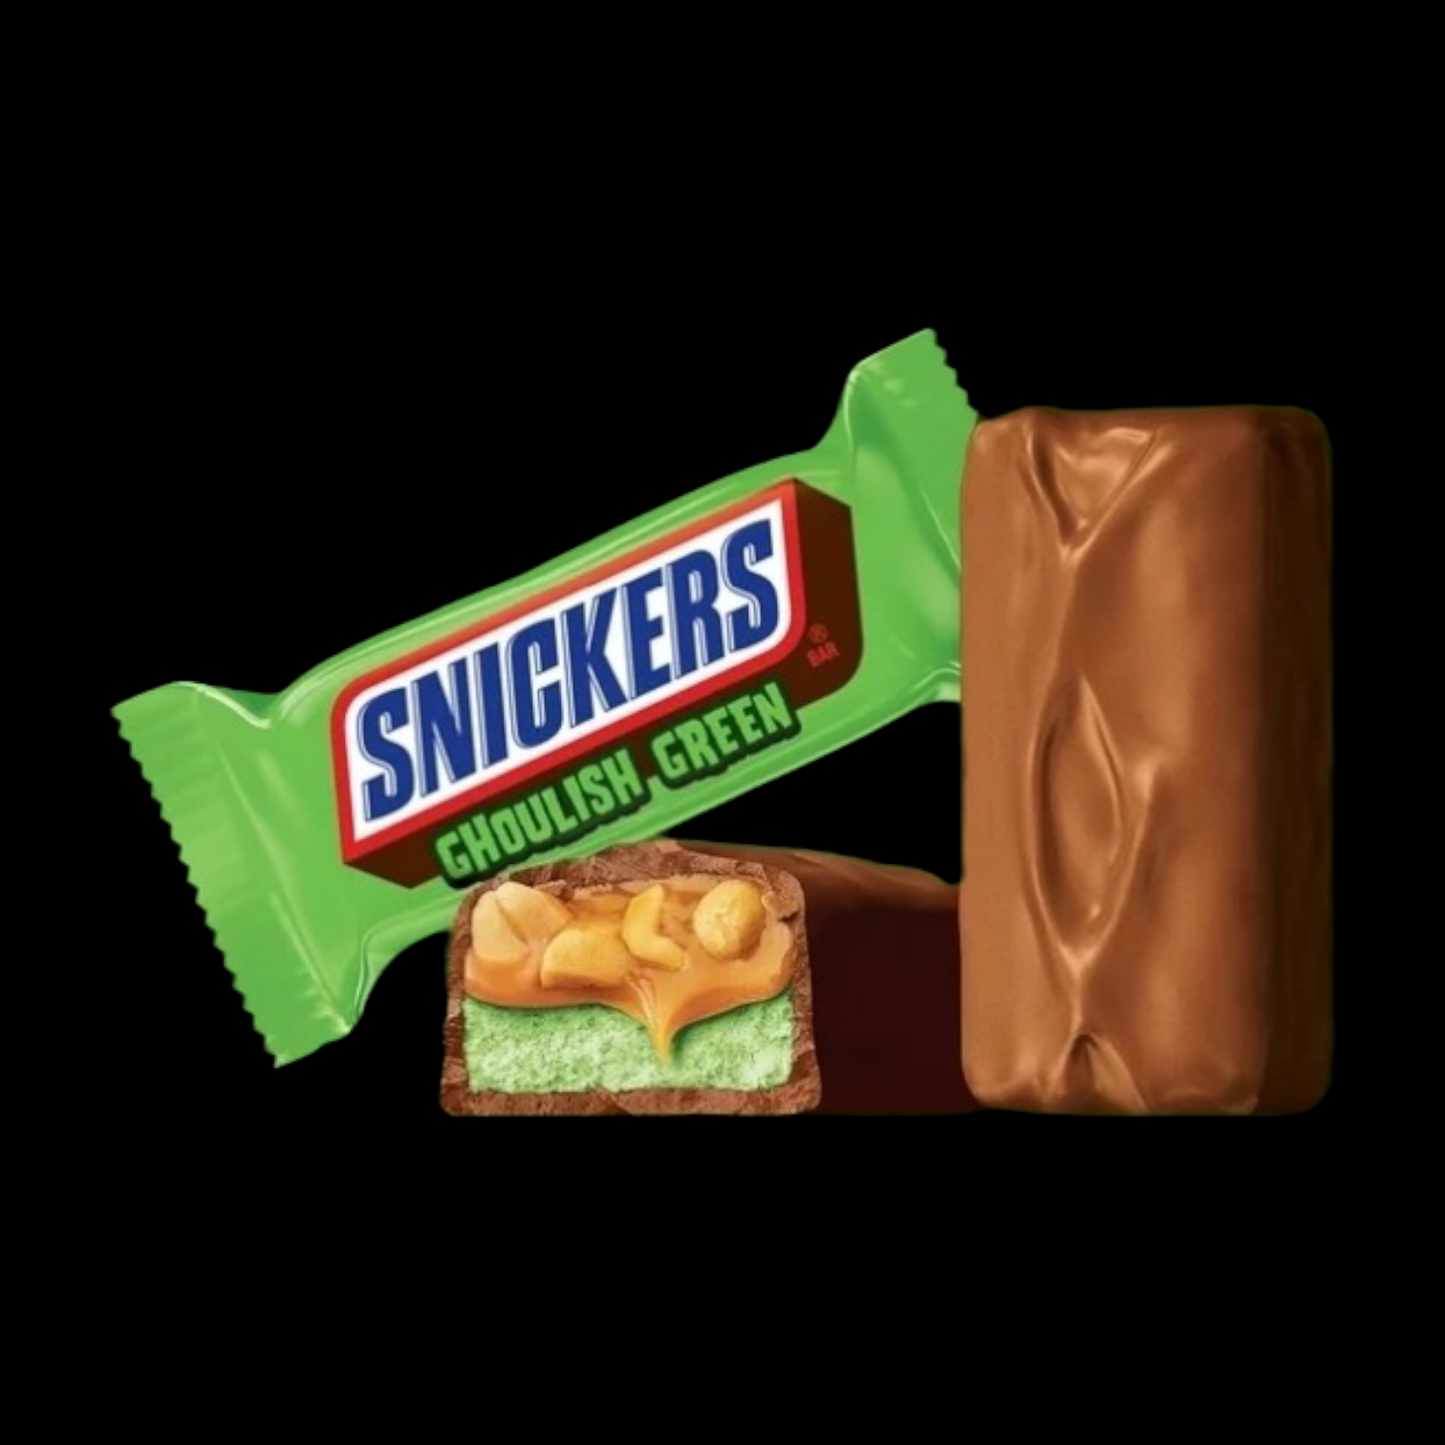 Snickers Groulish Green Riegel 18g